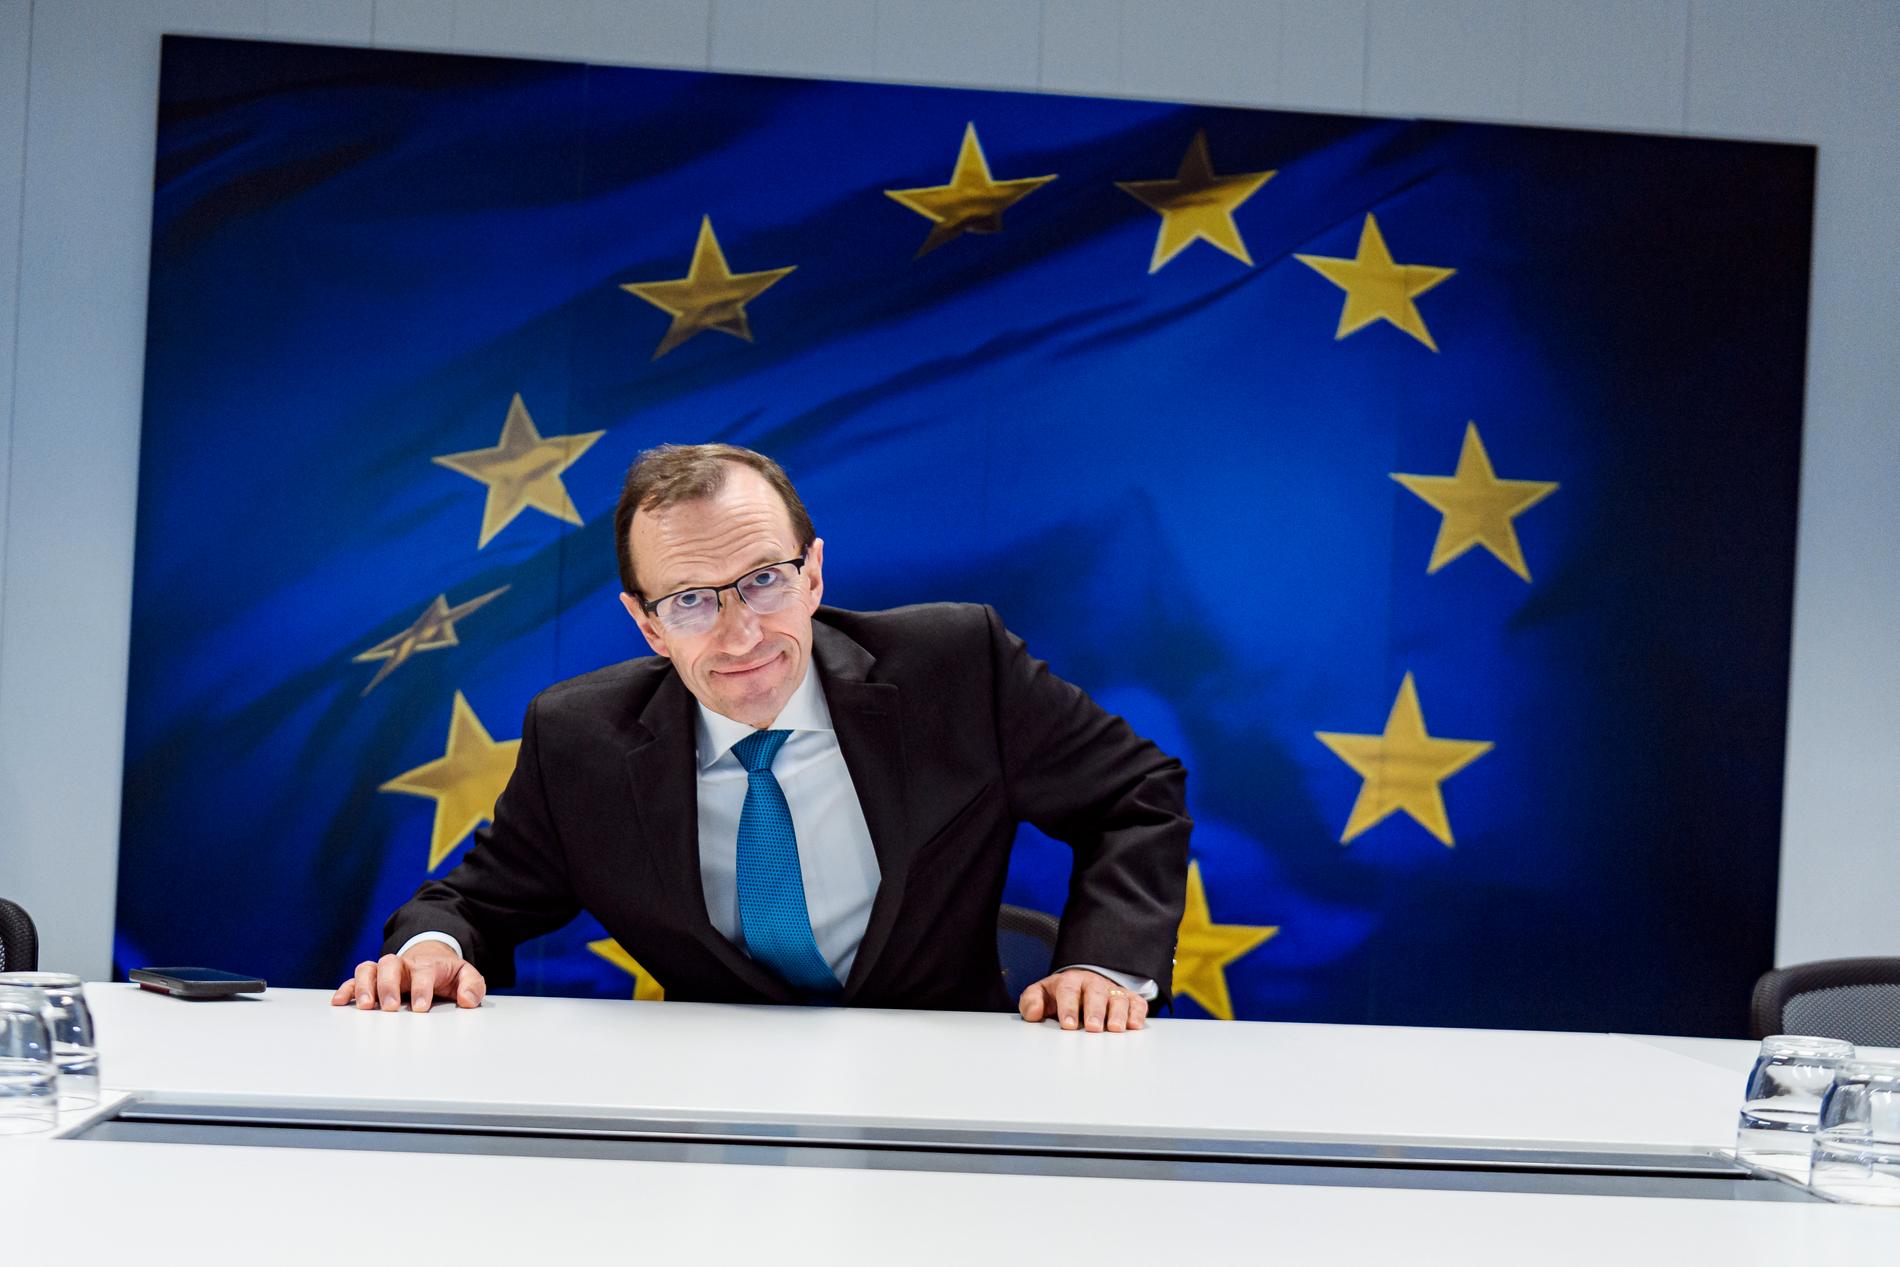 Brussels meeting: At the end of October, Foreign Minister Espen Barth Eide (AFP) met with the EU Commissioner for Crisis Management and Emergency Aid, Janez Lenarčić.  Among other things, they talked about the measures needed to start the peace process again.